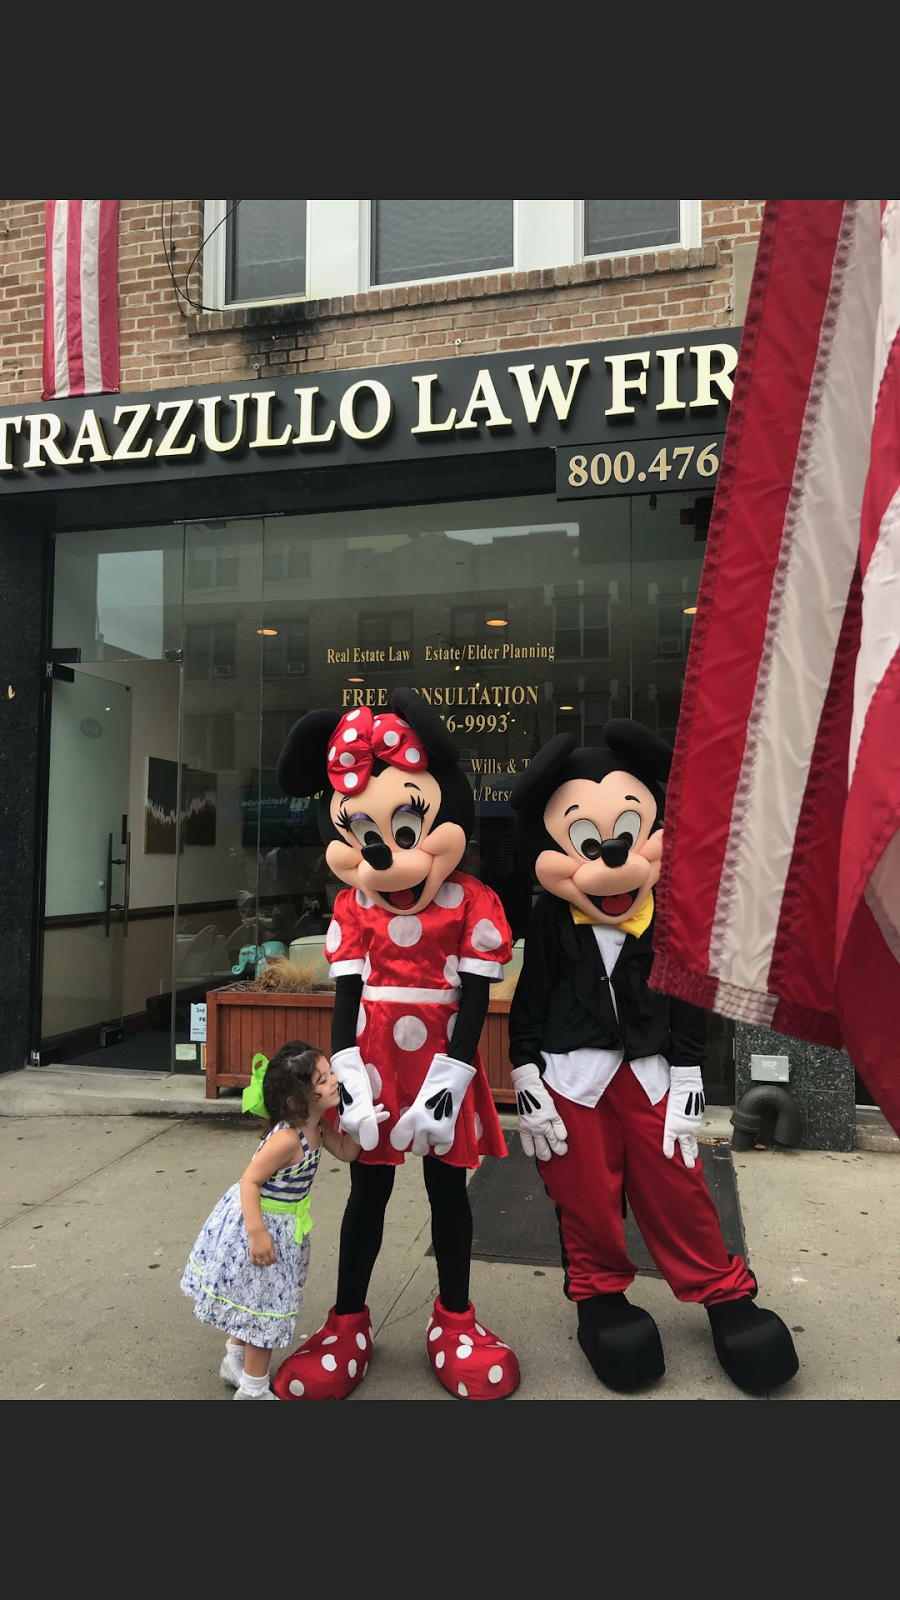 Sal Strazzullo Law firm pc | 7101 18th Ave, Brooklyn, NY 11204 | Phone: (718) 259-4600